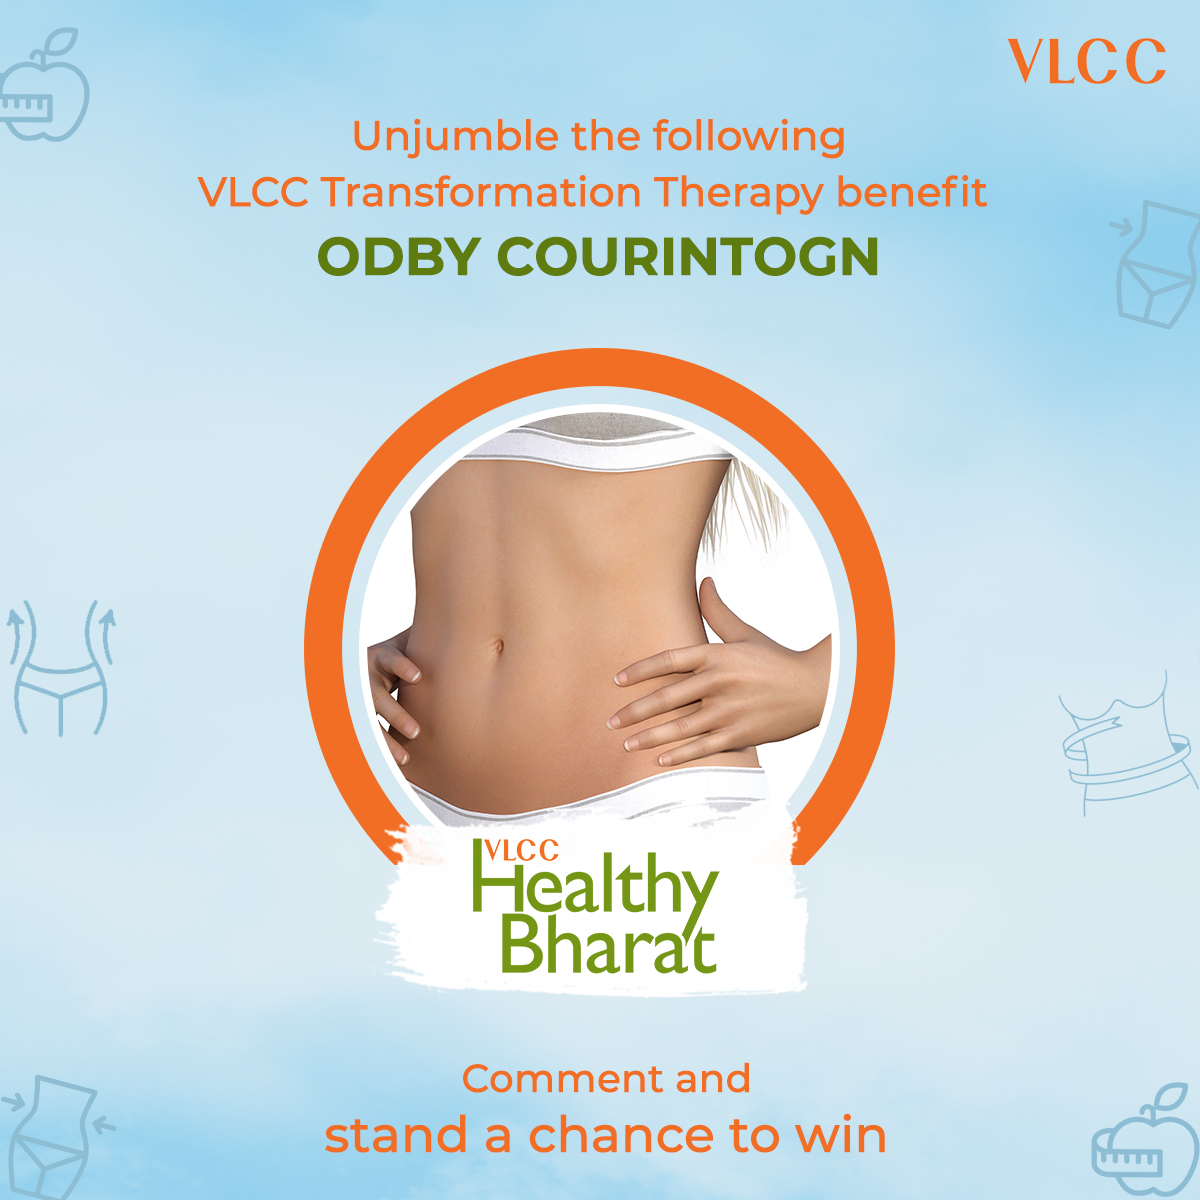 Write your answers in the comments section along with the #VLCCHealthyBharatContest and tag 3 friends to stand a chance to win exciting goodies from VLCC.

Terms & conditions apply.
.
.
.
.
#VLCCHealthyBharat #WorldHealthDay #WorldHealthDay2022 #strong #VLCC #VLCCIndia